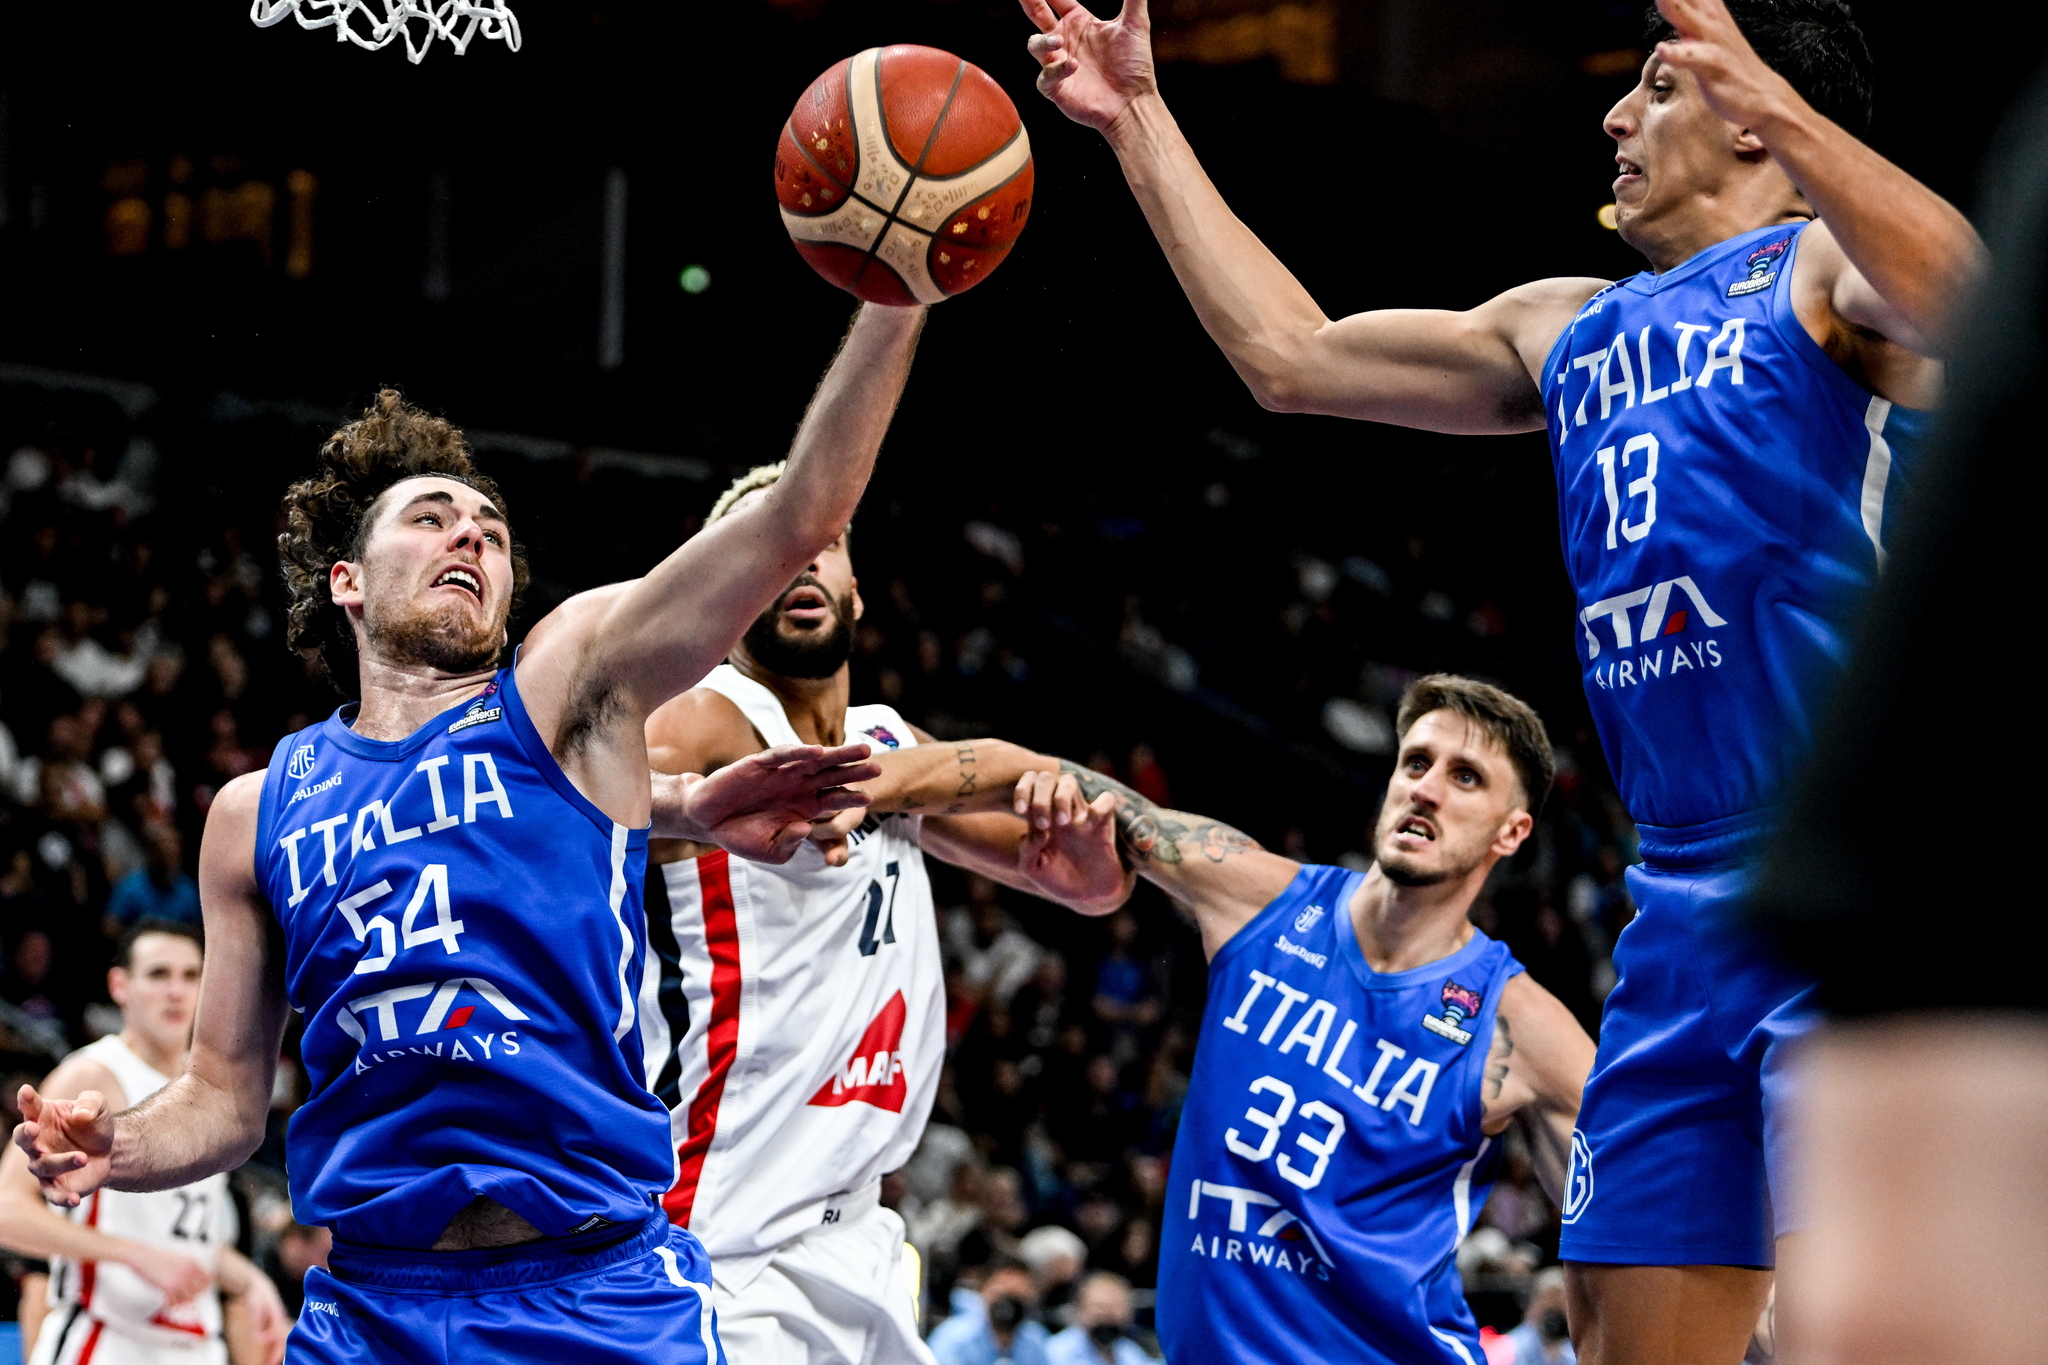  lt;HIT gt;Berlin lt;/HIT gt; (Germany), 14/09/2022.- Alessandro Pajola (L) of Italy, Achille Polonara of Italy (2nd -R), Simone Fontecchio of Italy (R) in action against Rudy Gobert (2nd -L) of France during the FIBA EuroBasket 2022 Quarter Finals match between Italy and France at EuroBasket Arena in  lt;HIT gt;Berlin lt;/HIT gt;, Germany, 14 September 2022. (Baloncesto, Francia, Alemania, Italia) EFE/EPA/FILIP SINGER